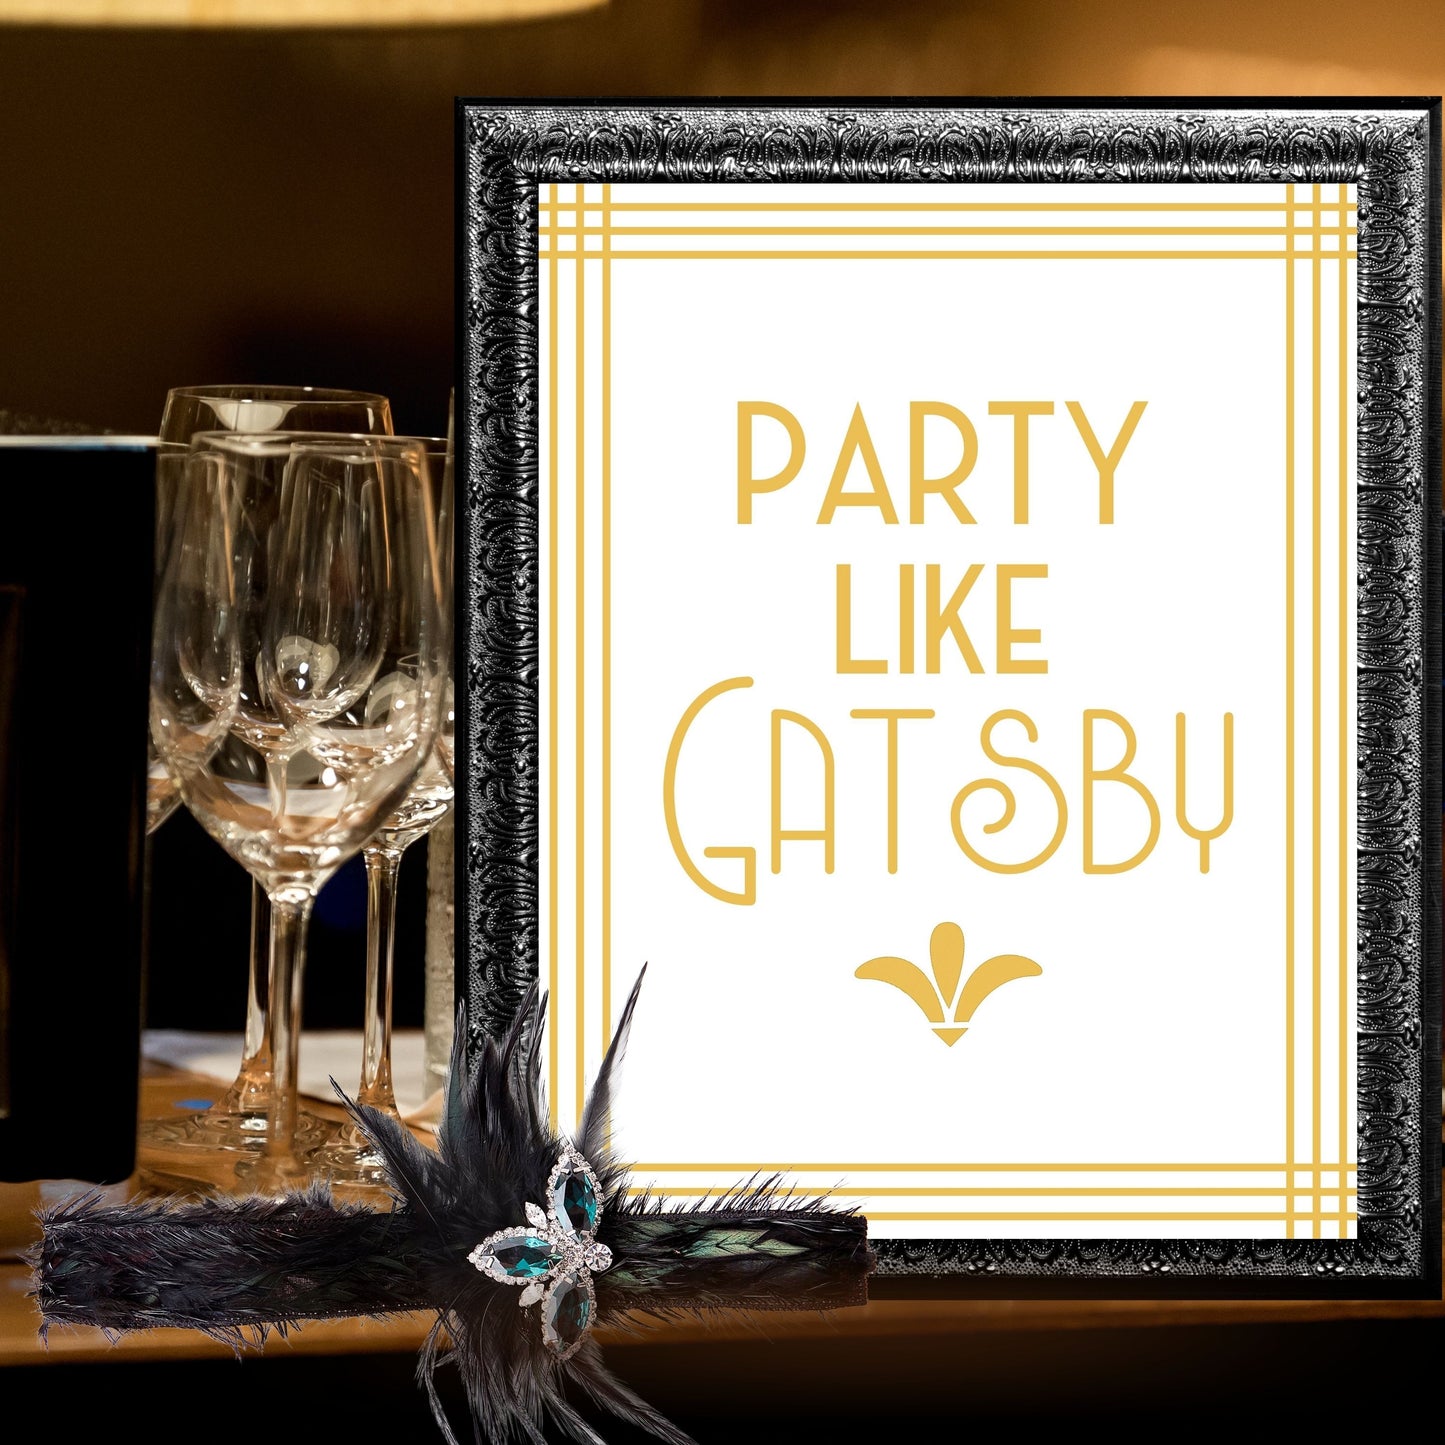 "Party Like Gatsby" Printable Party Sign For Great Gatsby or Roaring 20's Party Or Wedding, White & Gold, Printable Party Decor